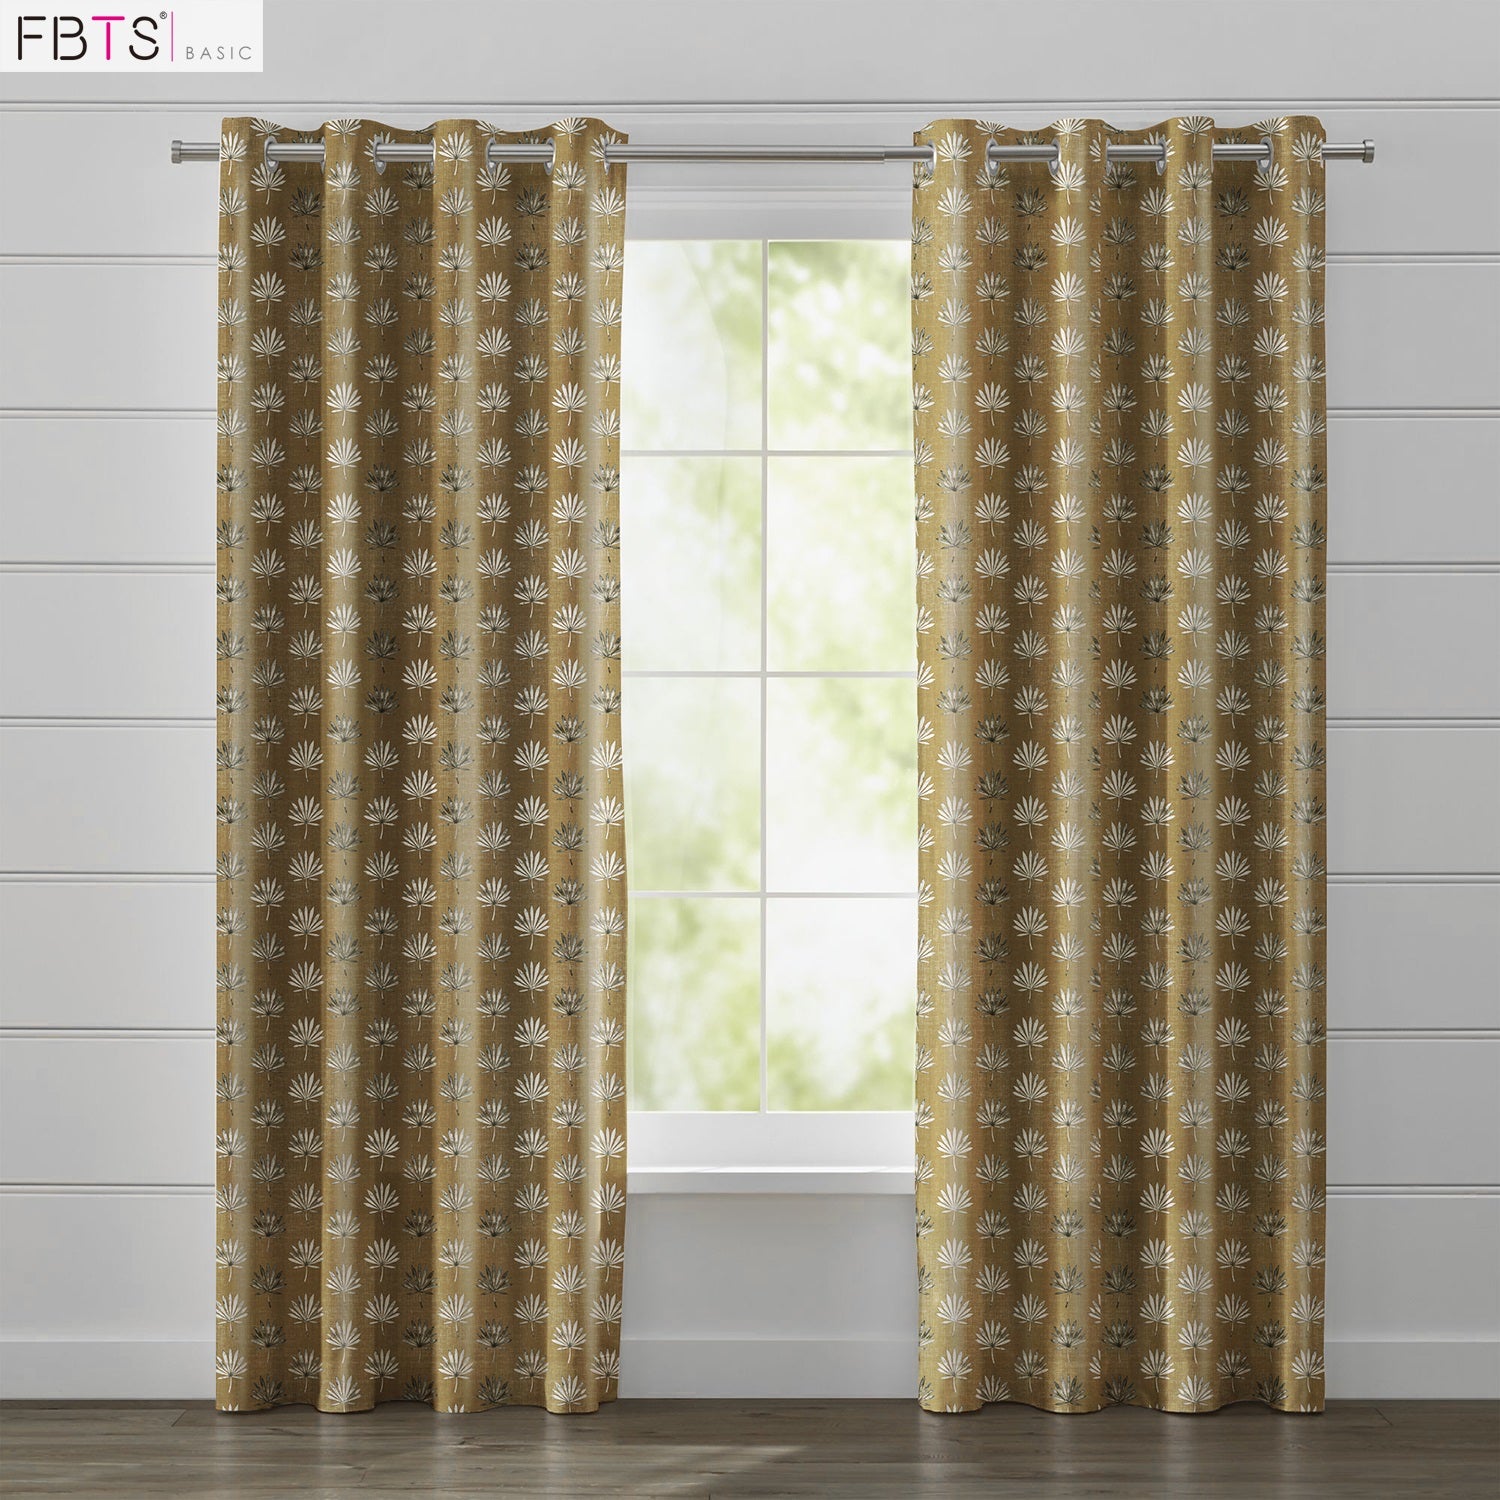 Window Curtain 1 Panel 50% Blackout Yellow Color Leaves Pattern Custom Made Window Drapes